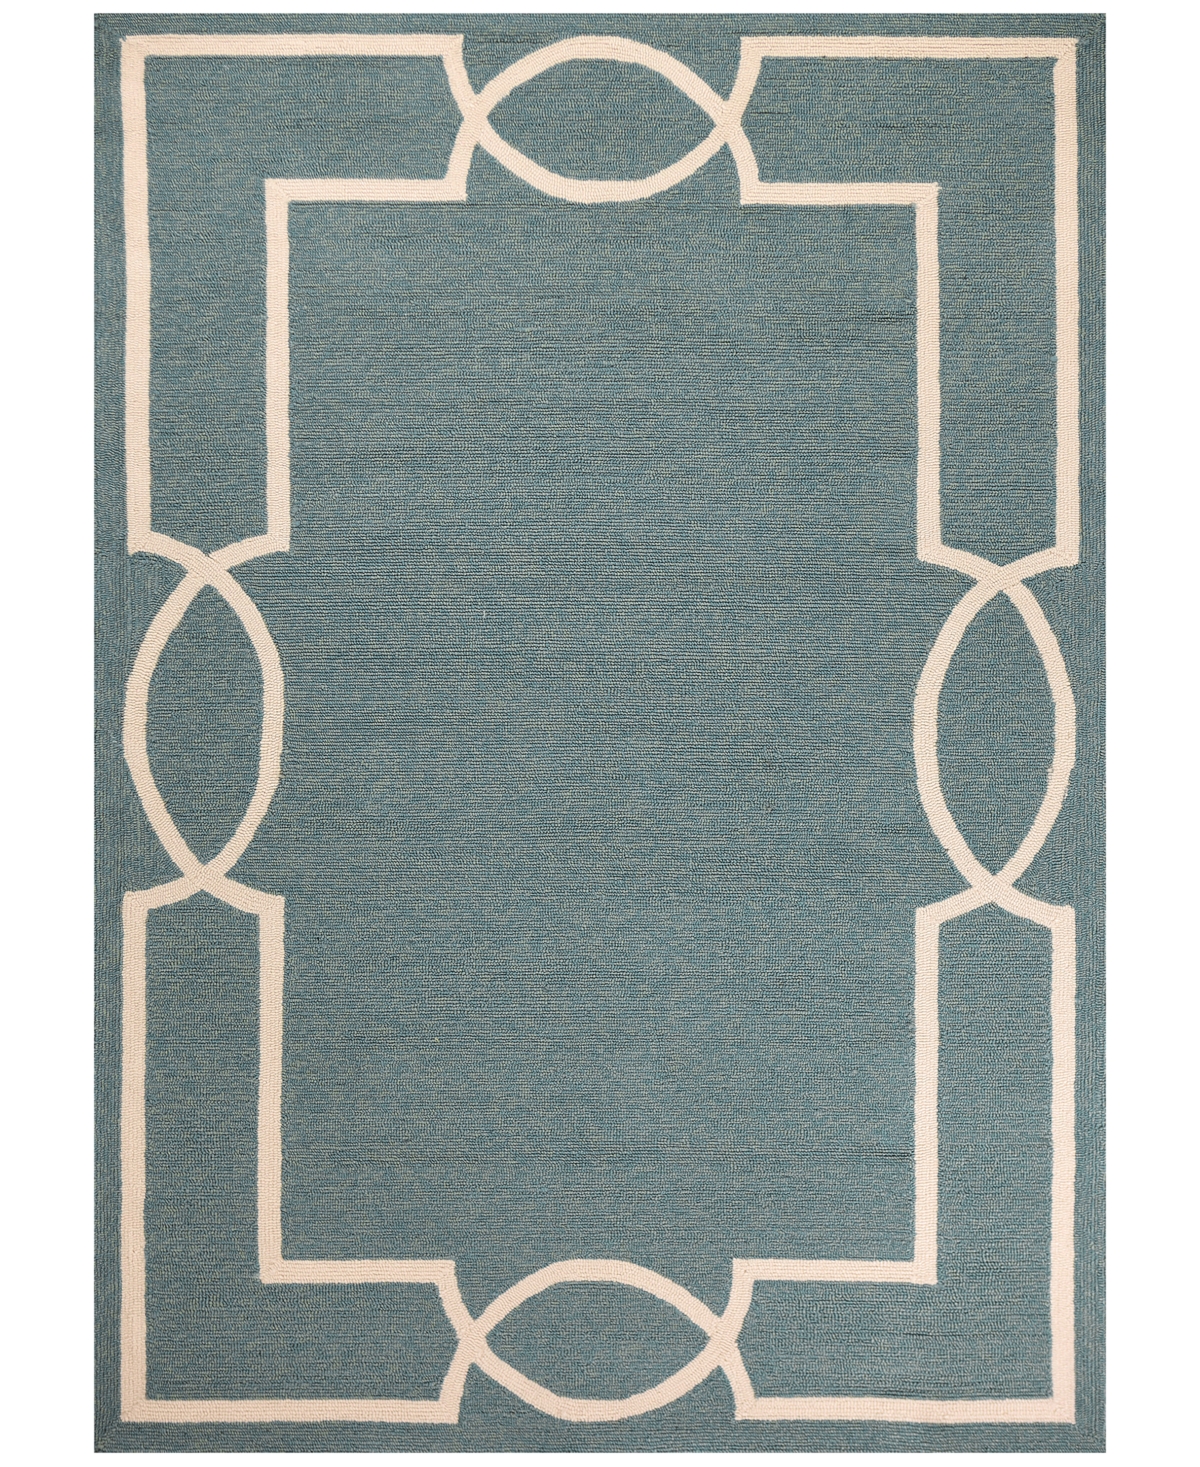 Libby Langdon Hamptons Madison 7' Indoor/outdoor Round Area Rug In Spa